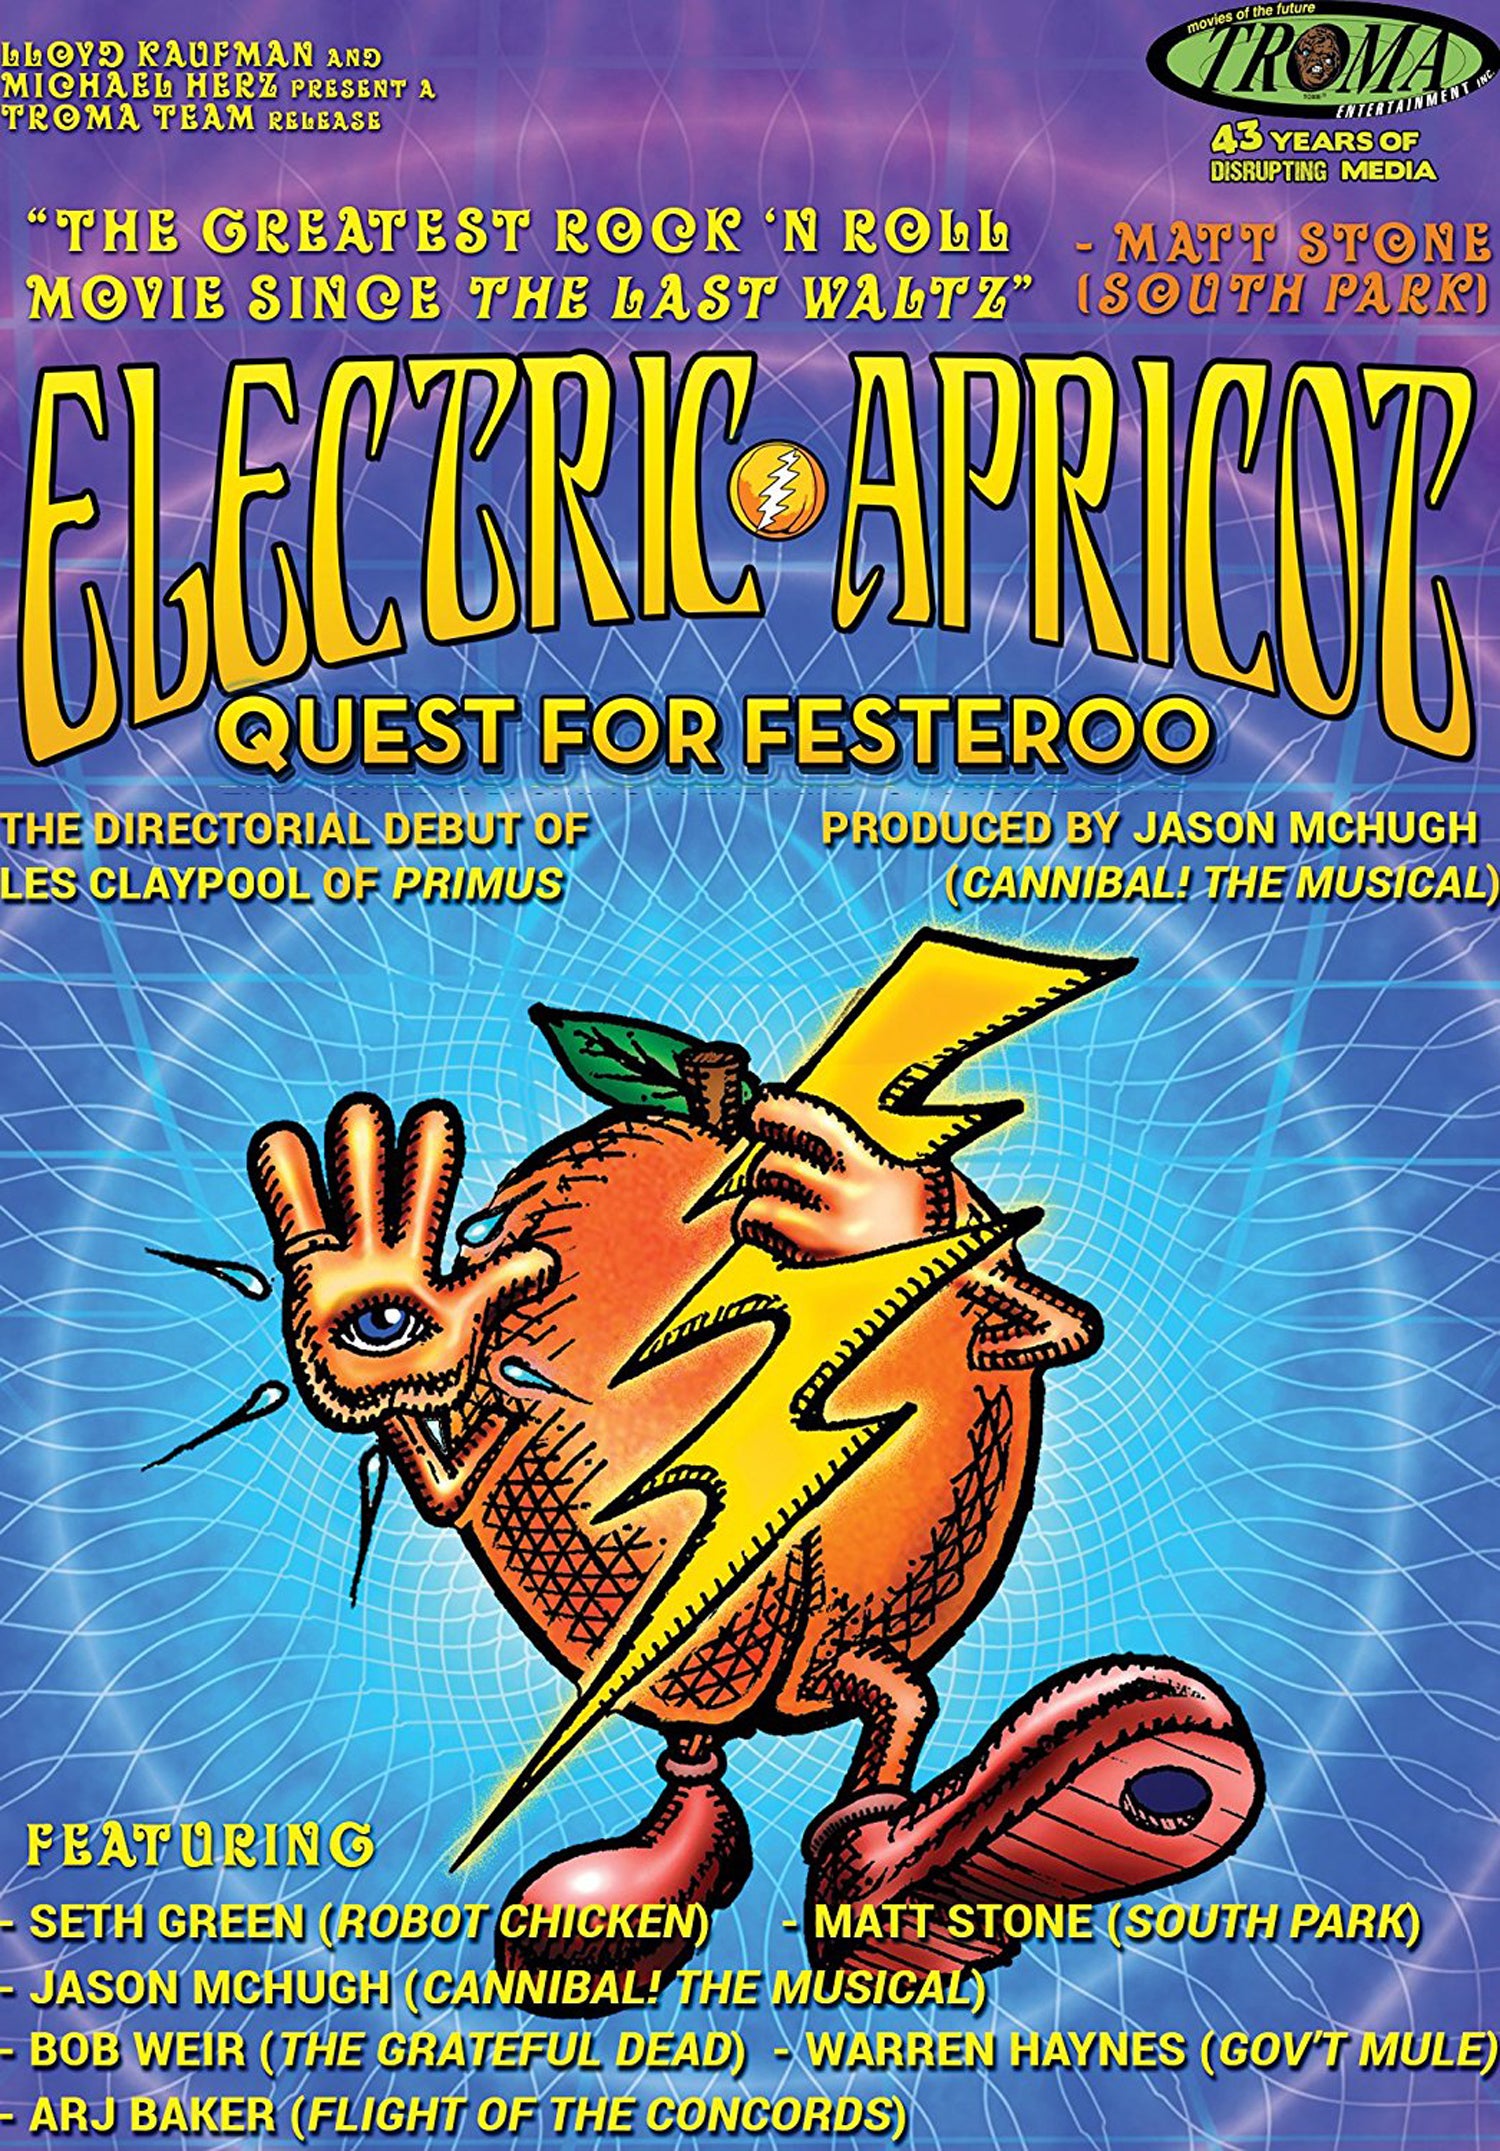 ELECTRIC APRICOT: QUEST FOR FESTEROO DVD